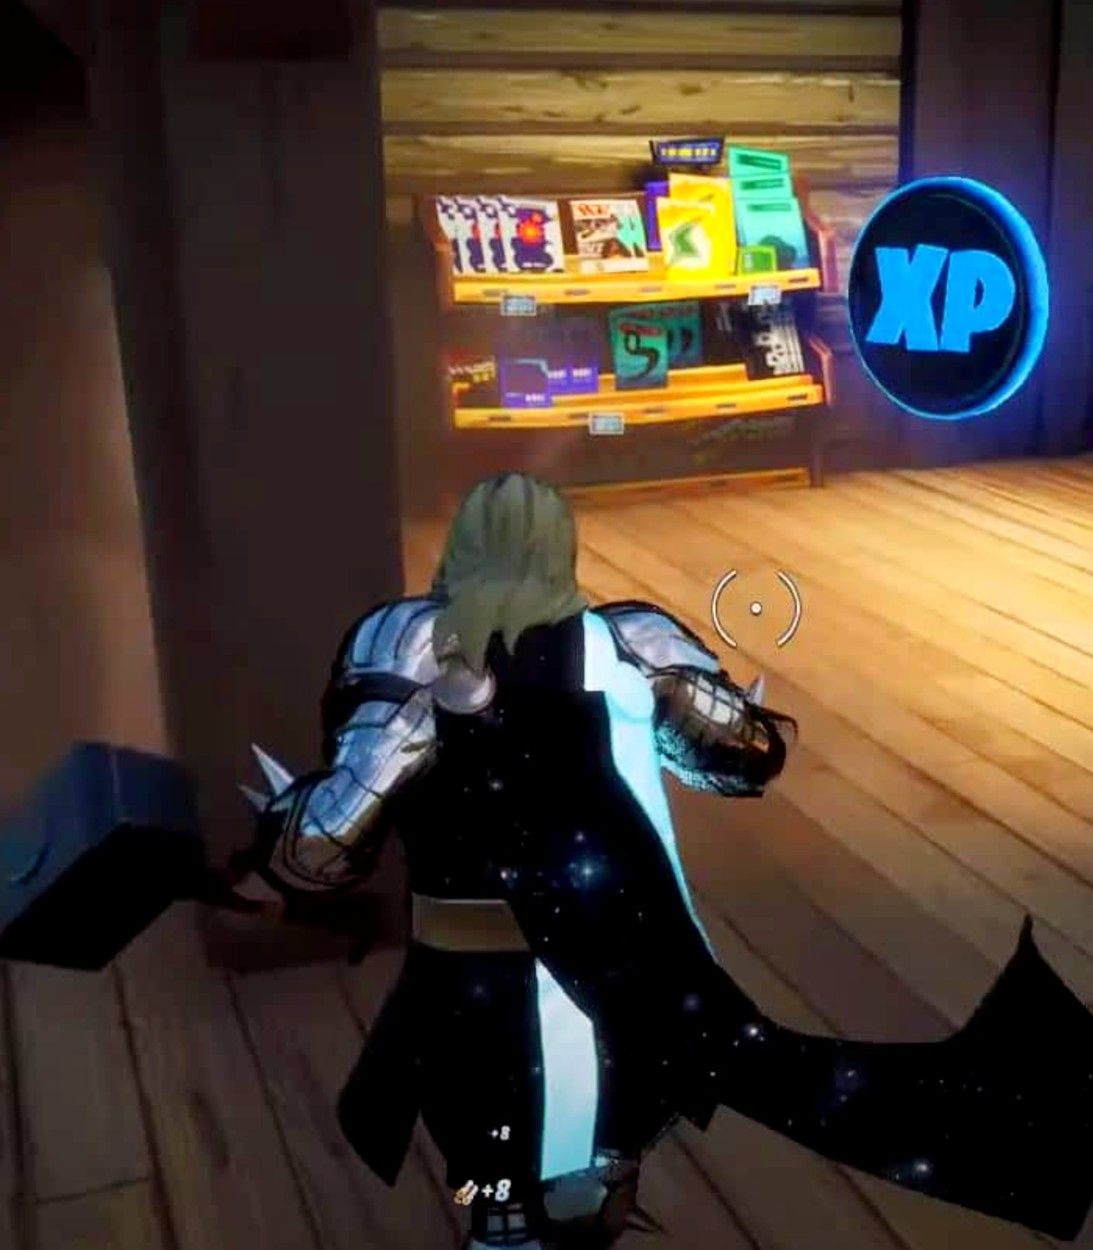 A player uses the Thor skin and finds a blue XP coin from Week 2 of Fortnite Season 4 in the Bait Shop at Misty Meadows